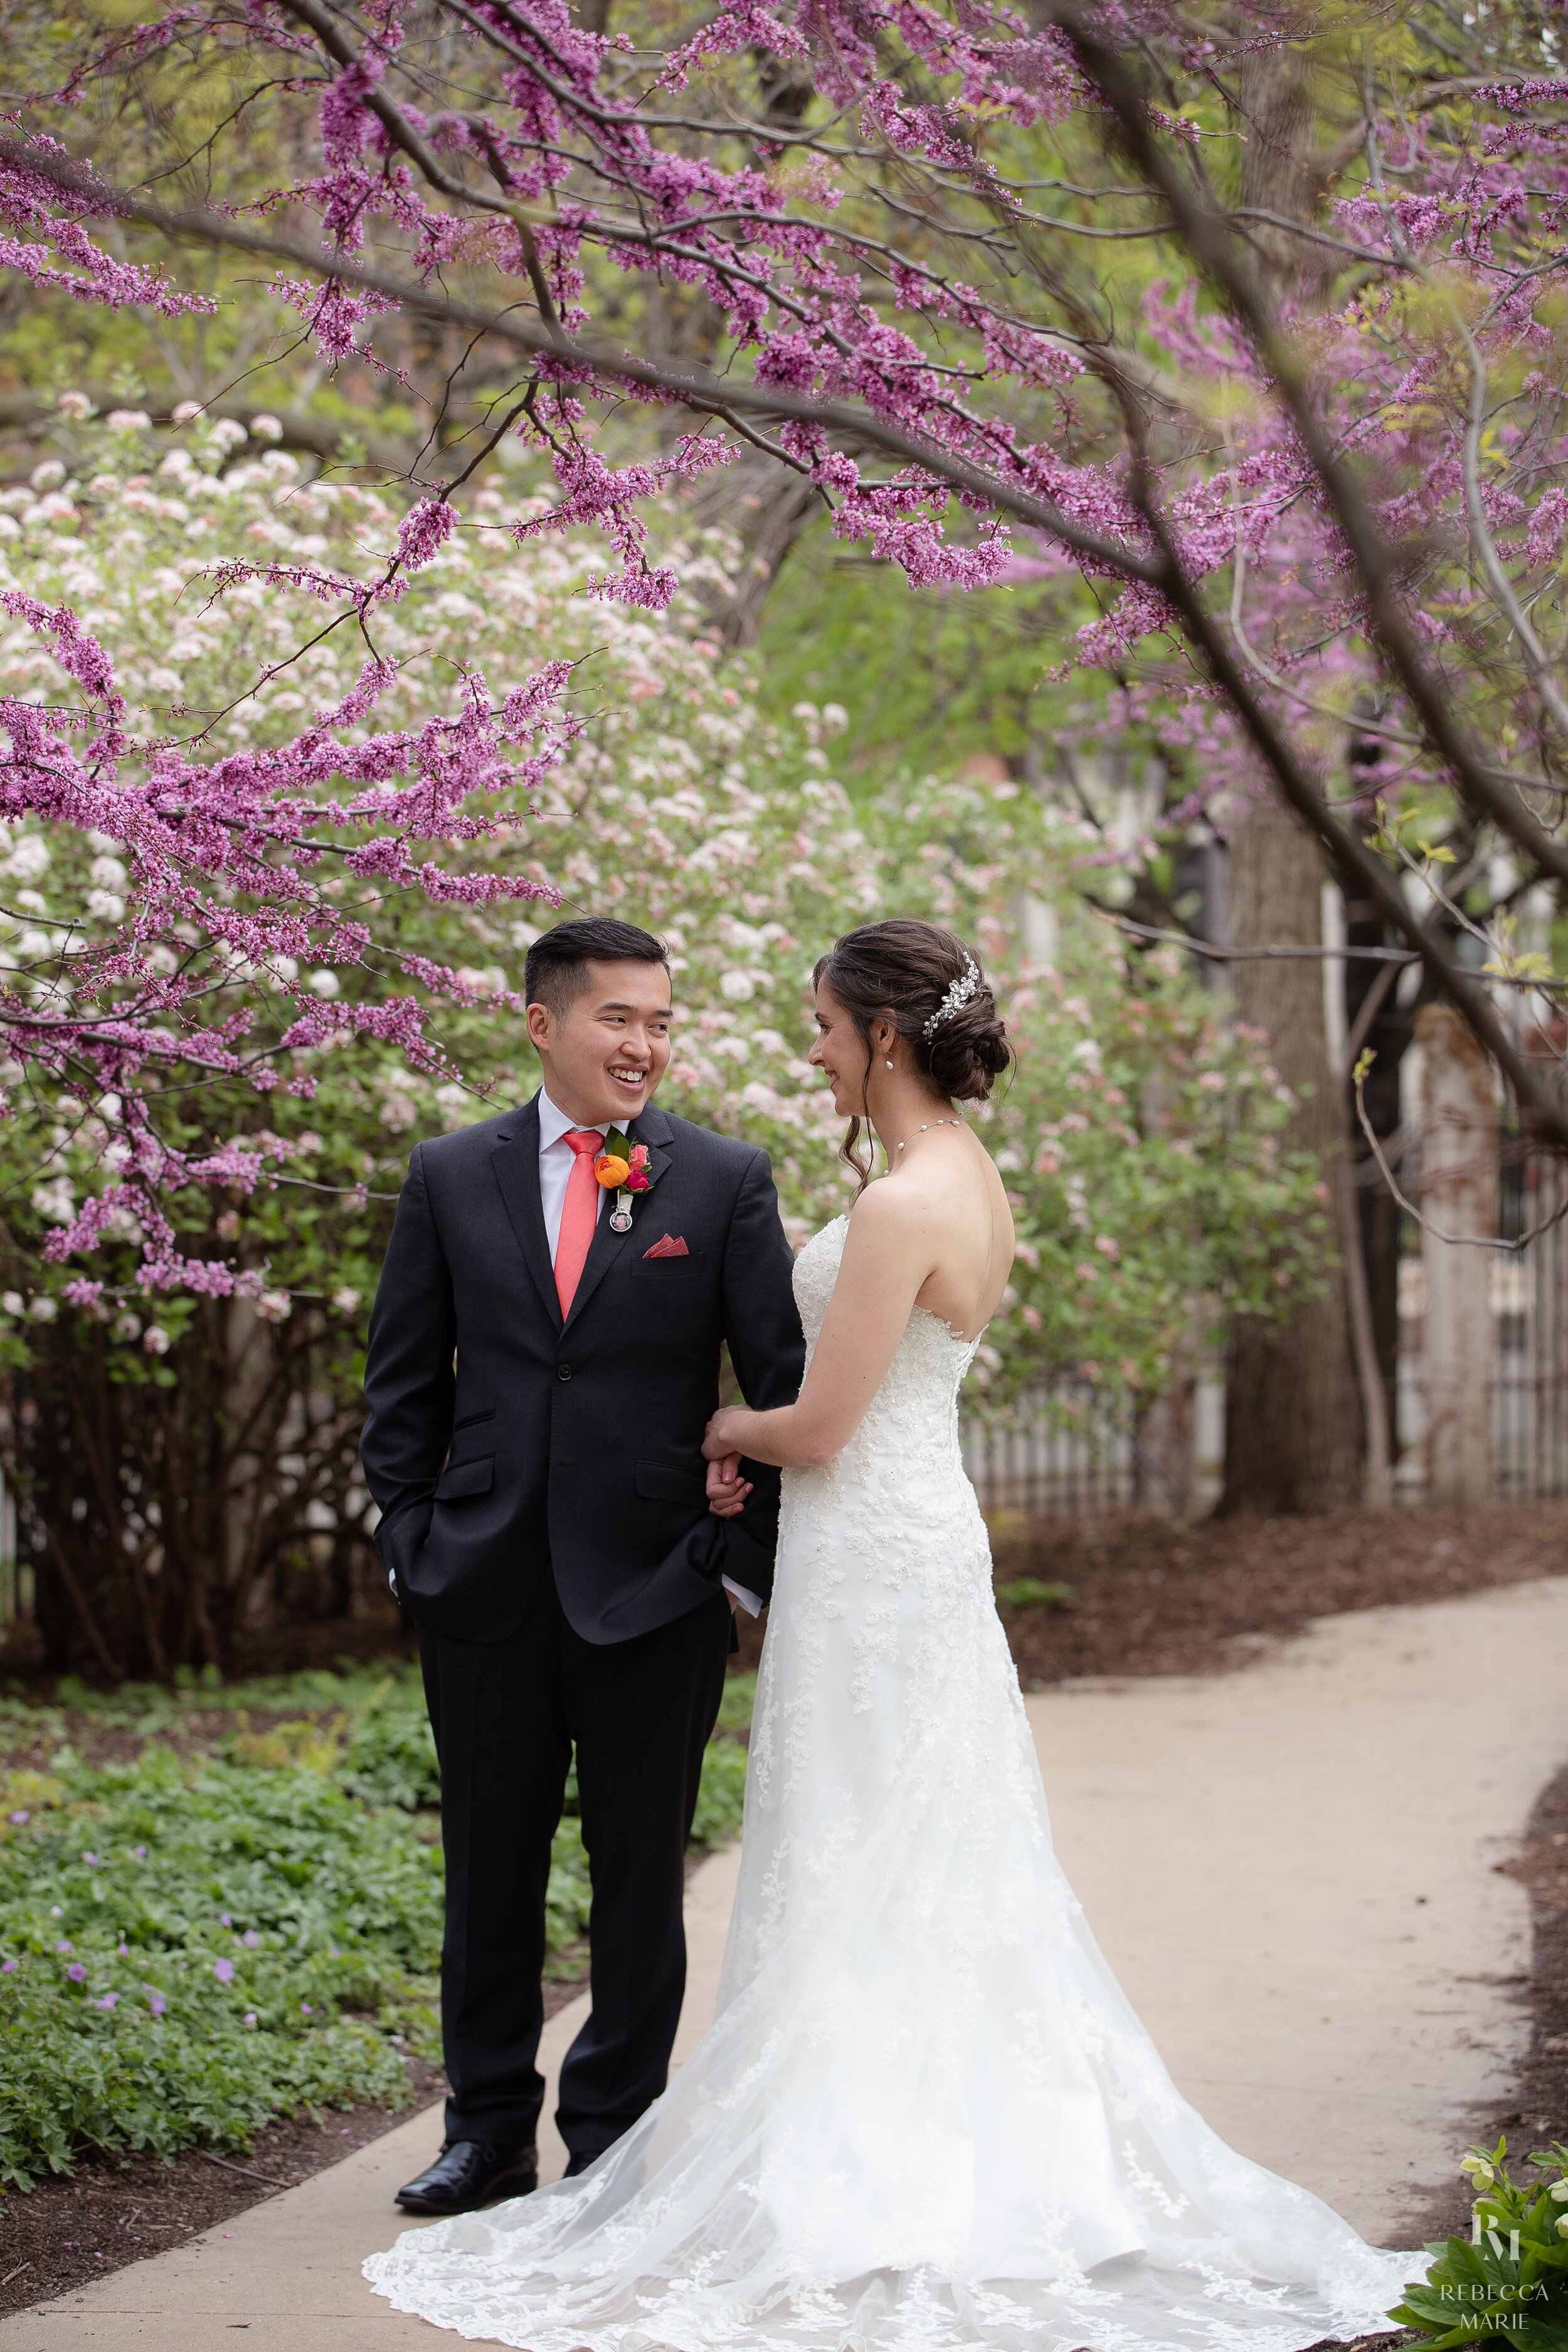 Lincoln-Park-Conservatory-Real-Wedding-Rebecca-Marie-Photography_0060.jpg